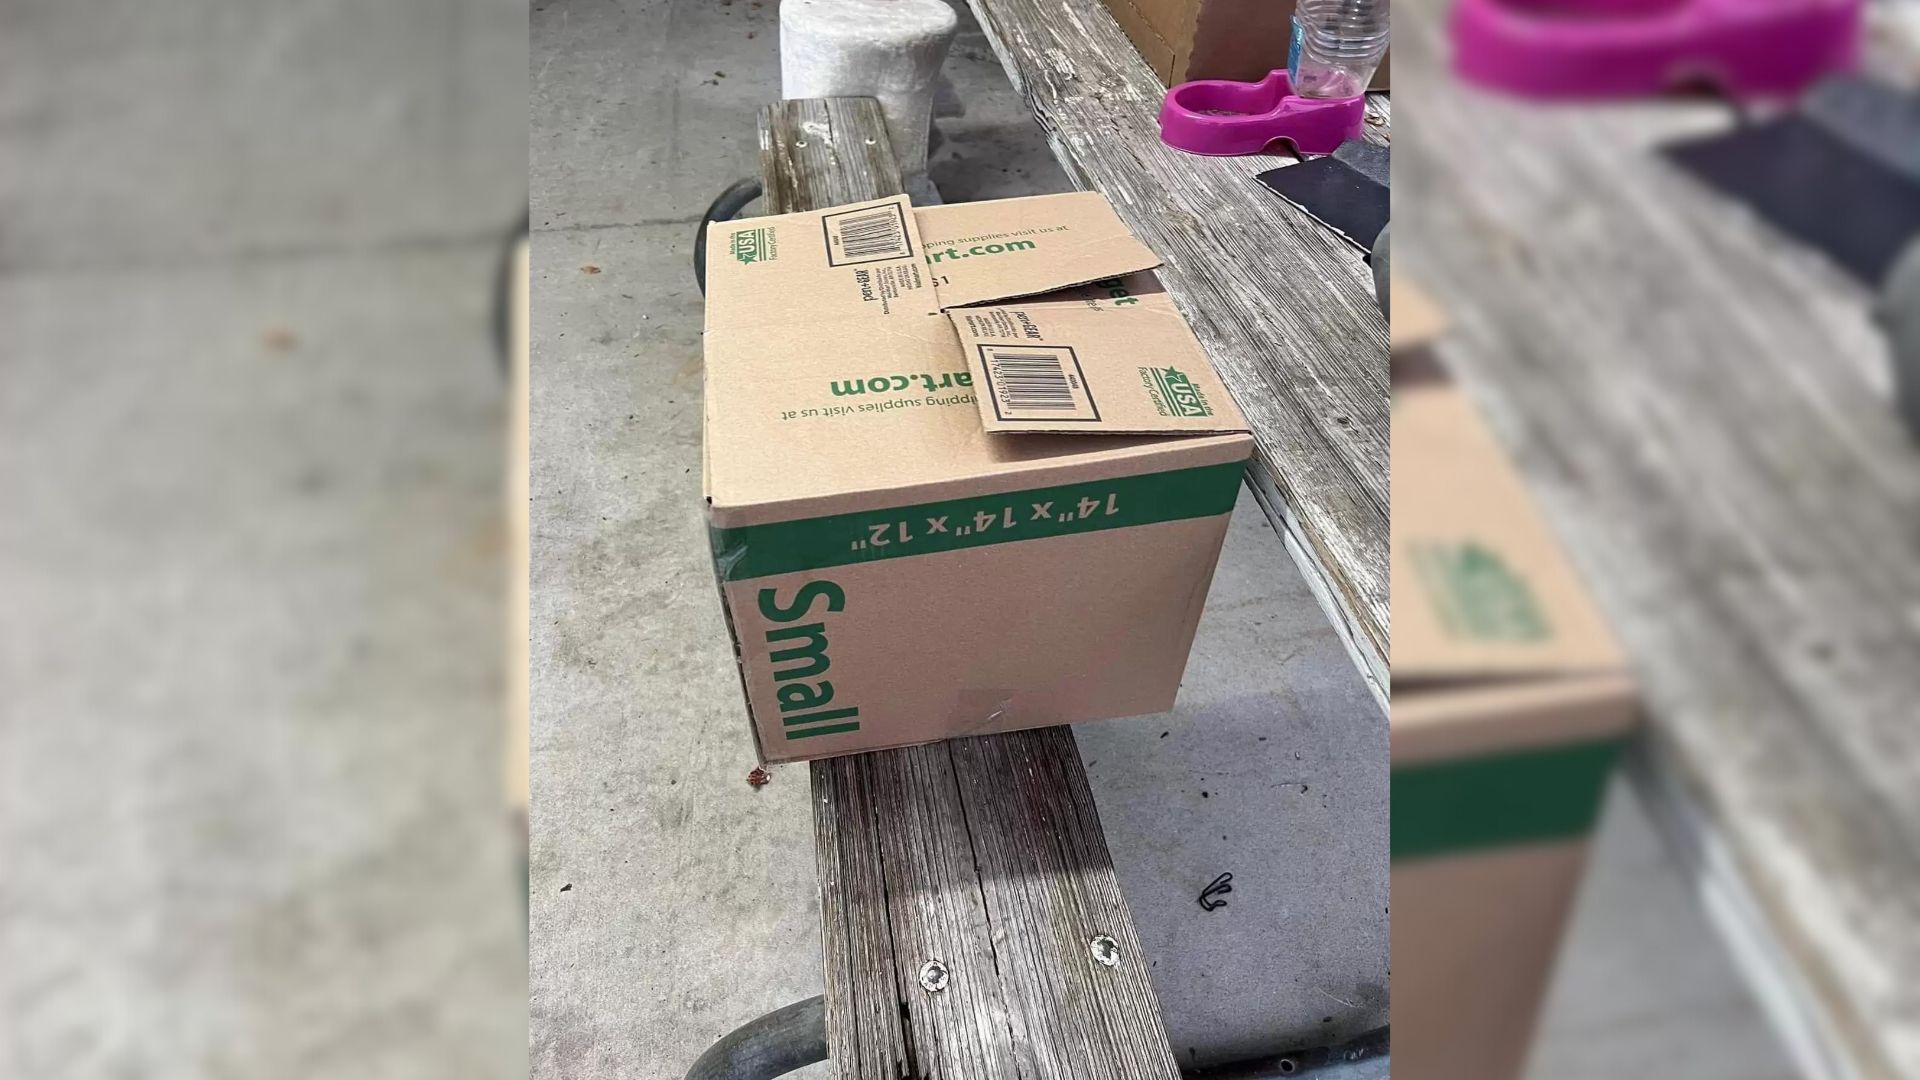 Shelter Worker Finds A Shocking Surprise Dumped In A Small Cardboard Box